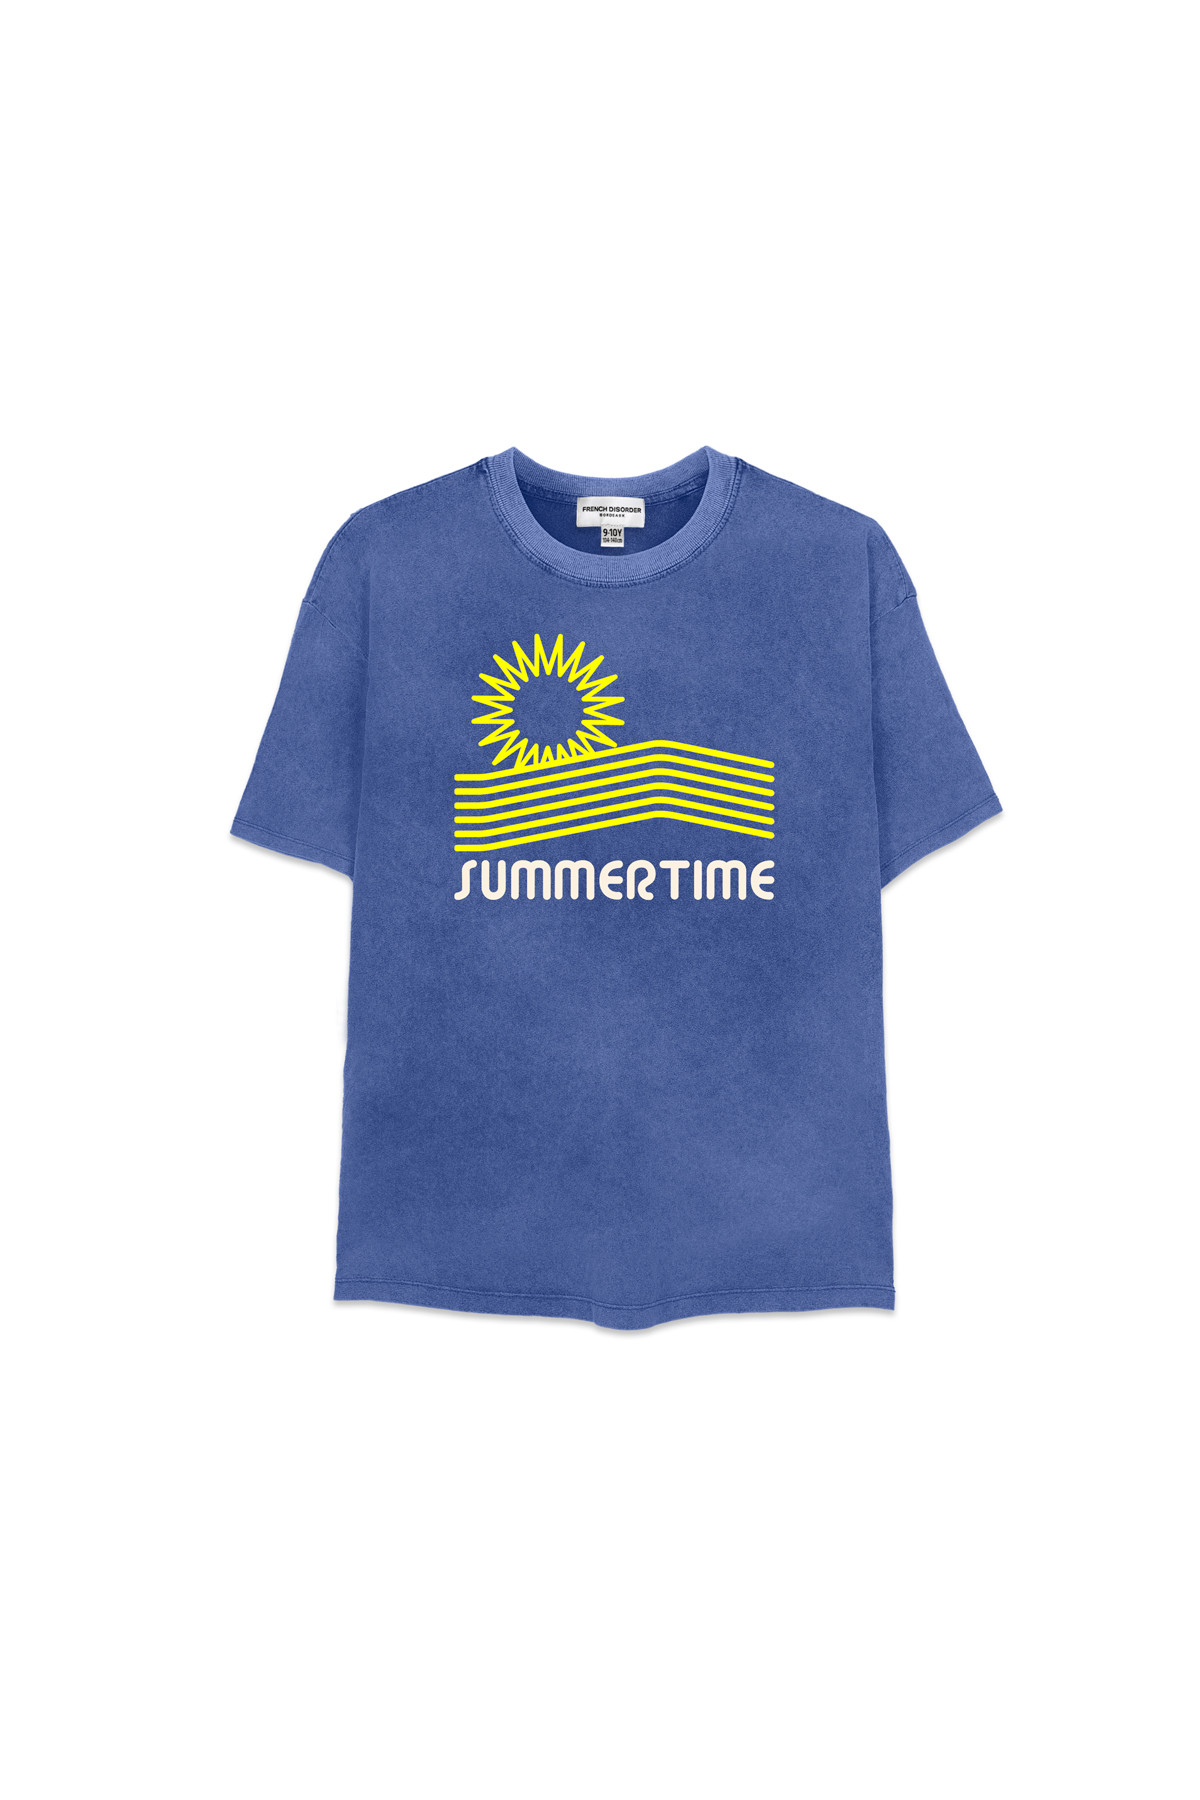 Tshirt KIDS Washed SUMMERTIME French Disorder